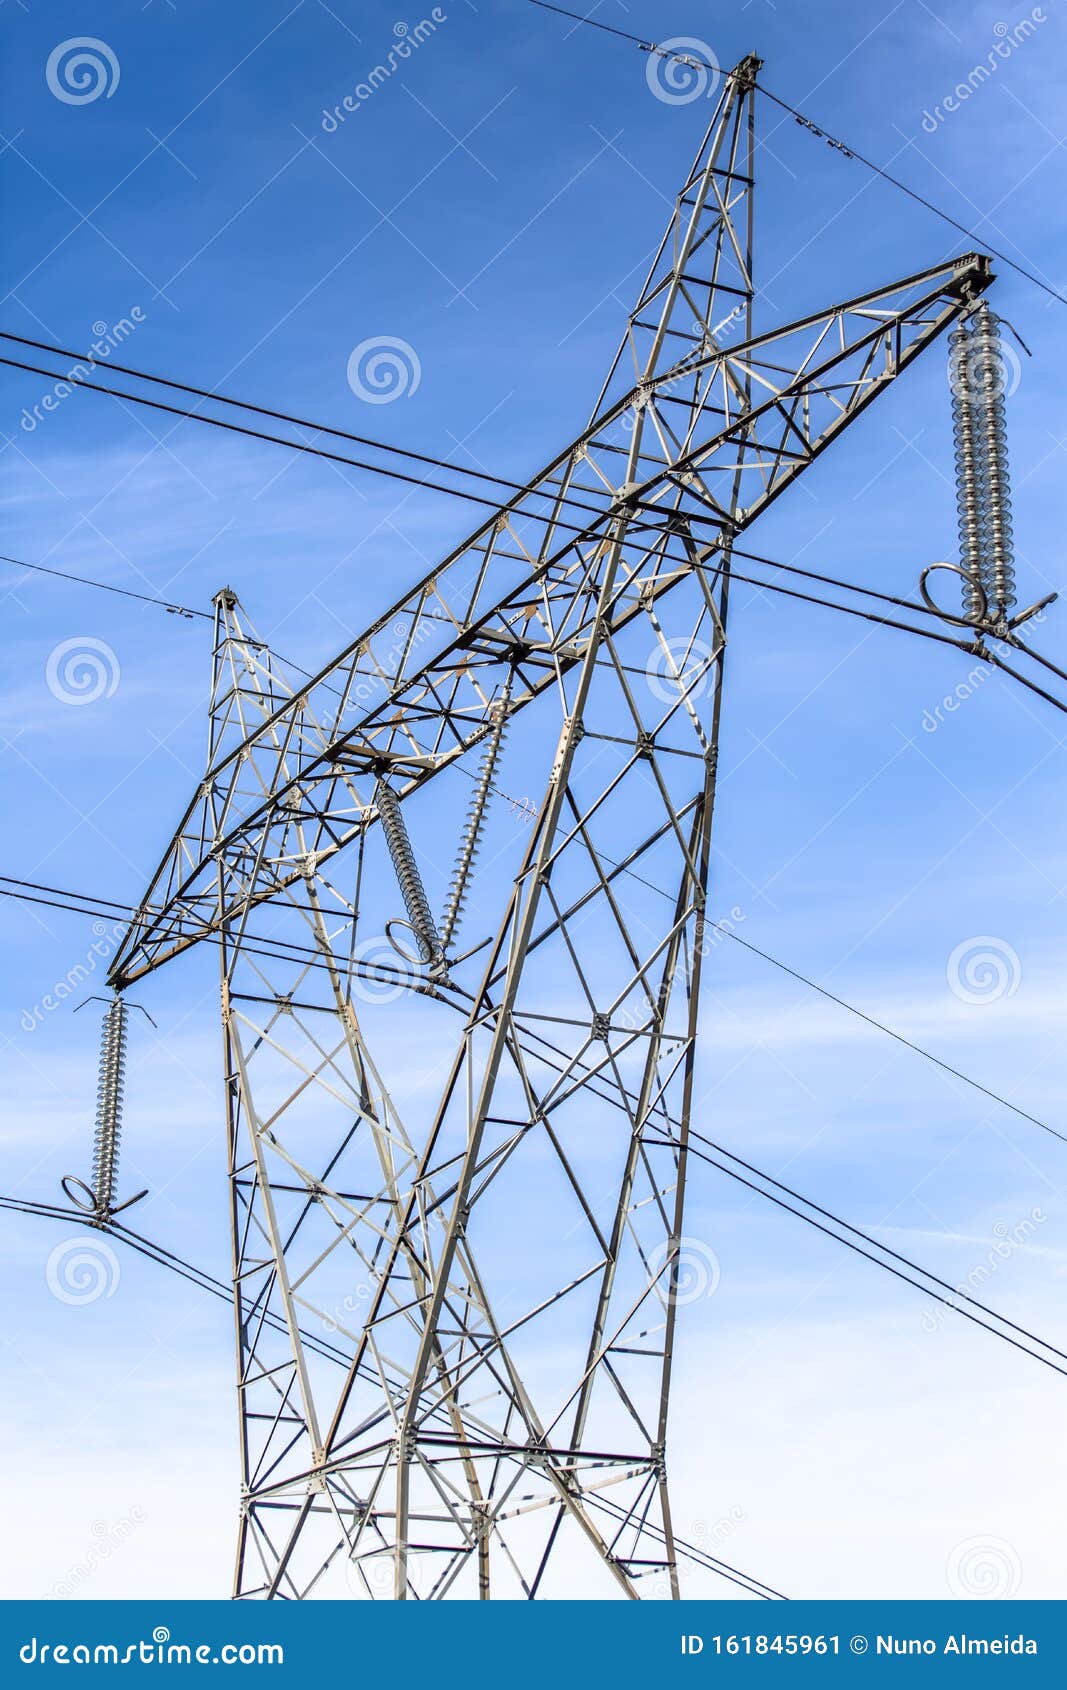 view of metallic structure tower and power lines